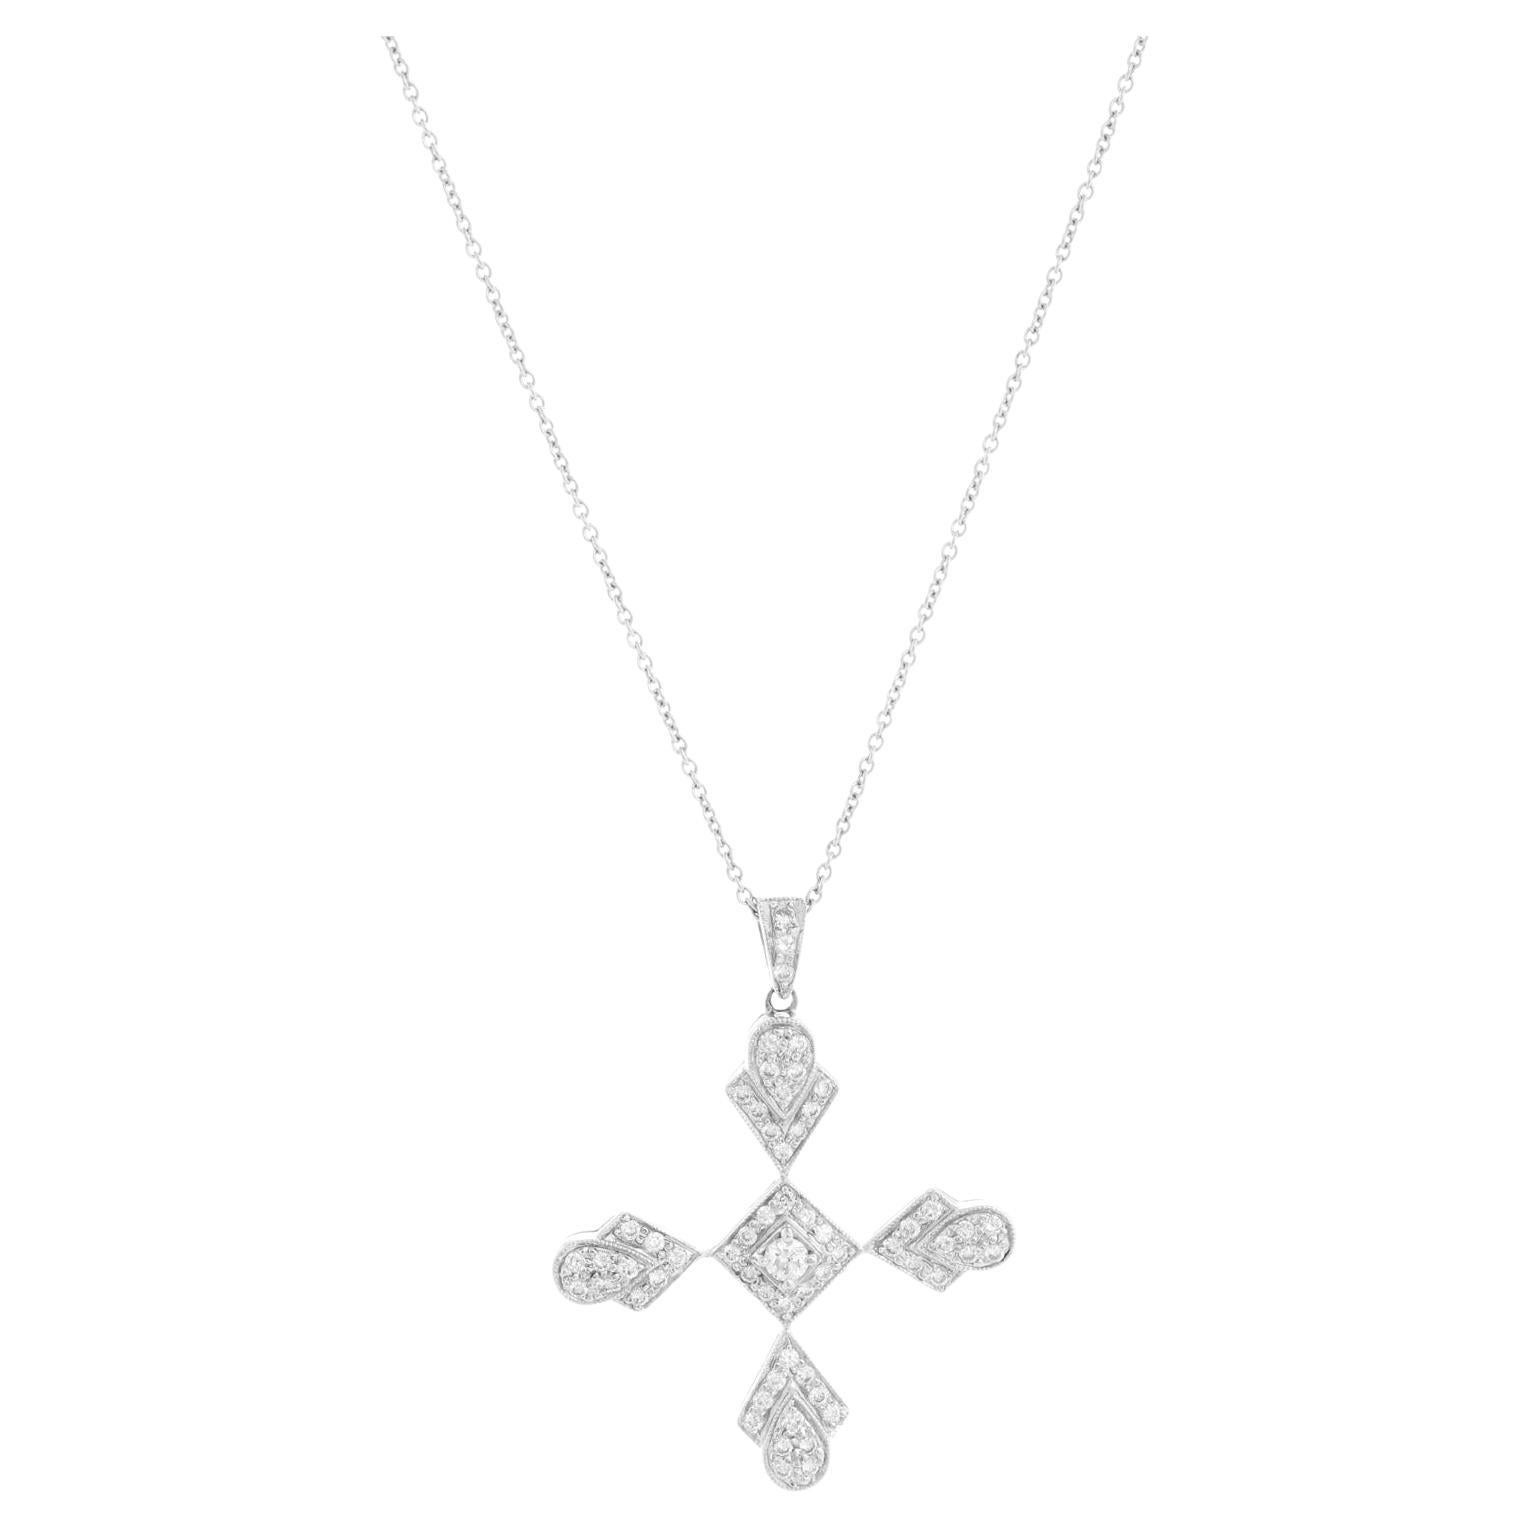 Stunning Sue Gragg 18k White Gold Diamond Cross with Necklace